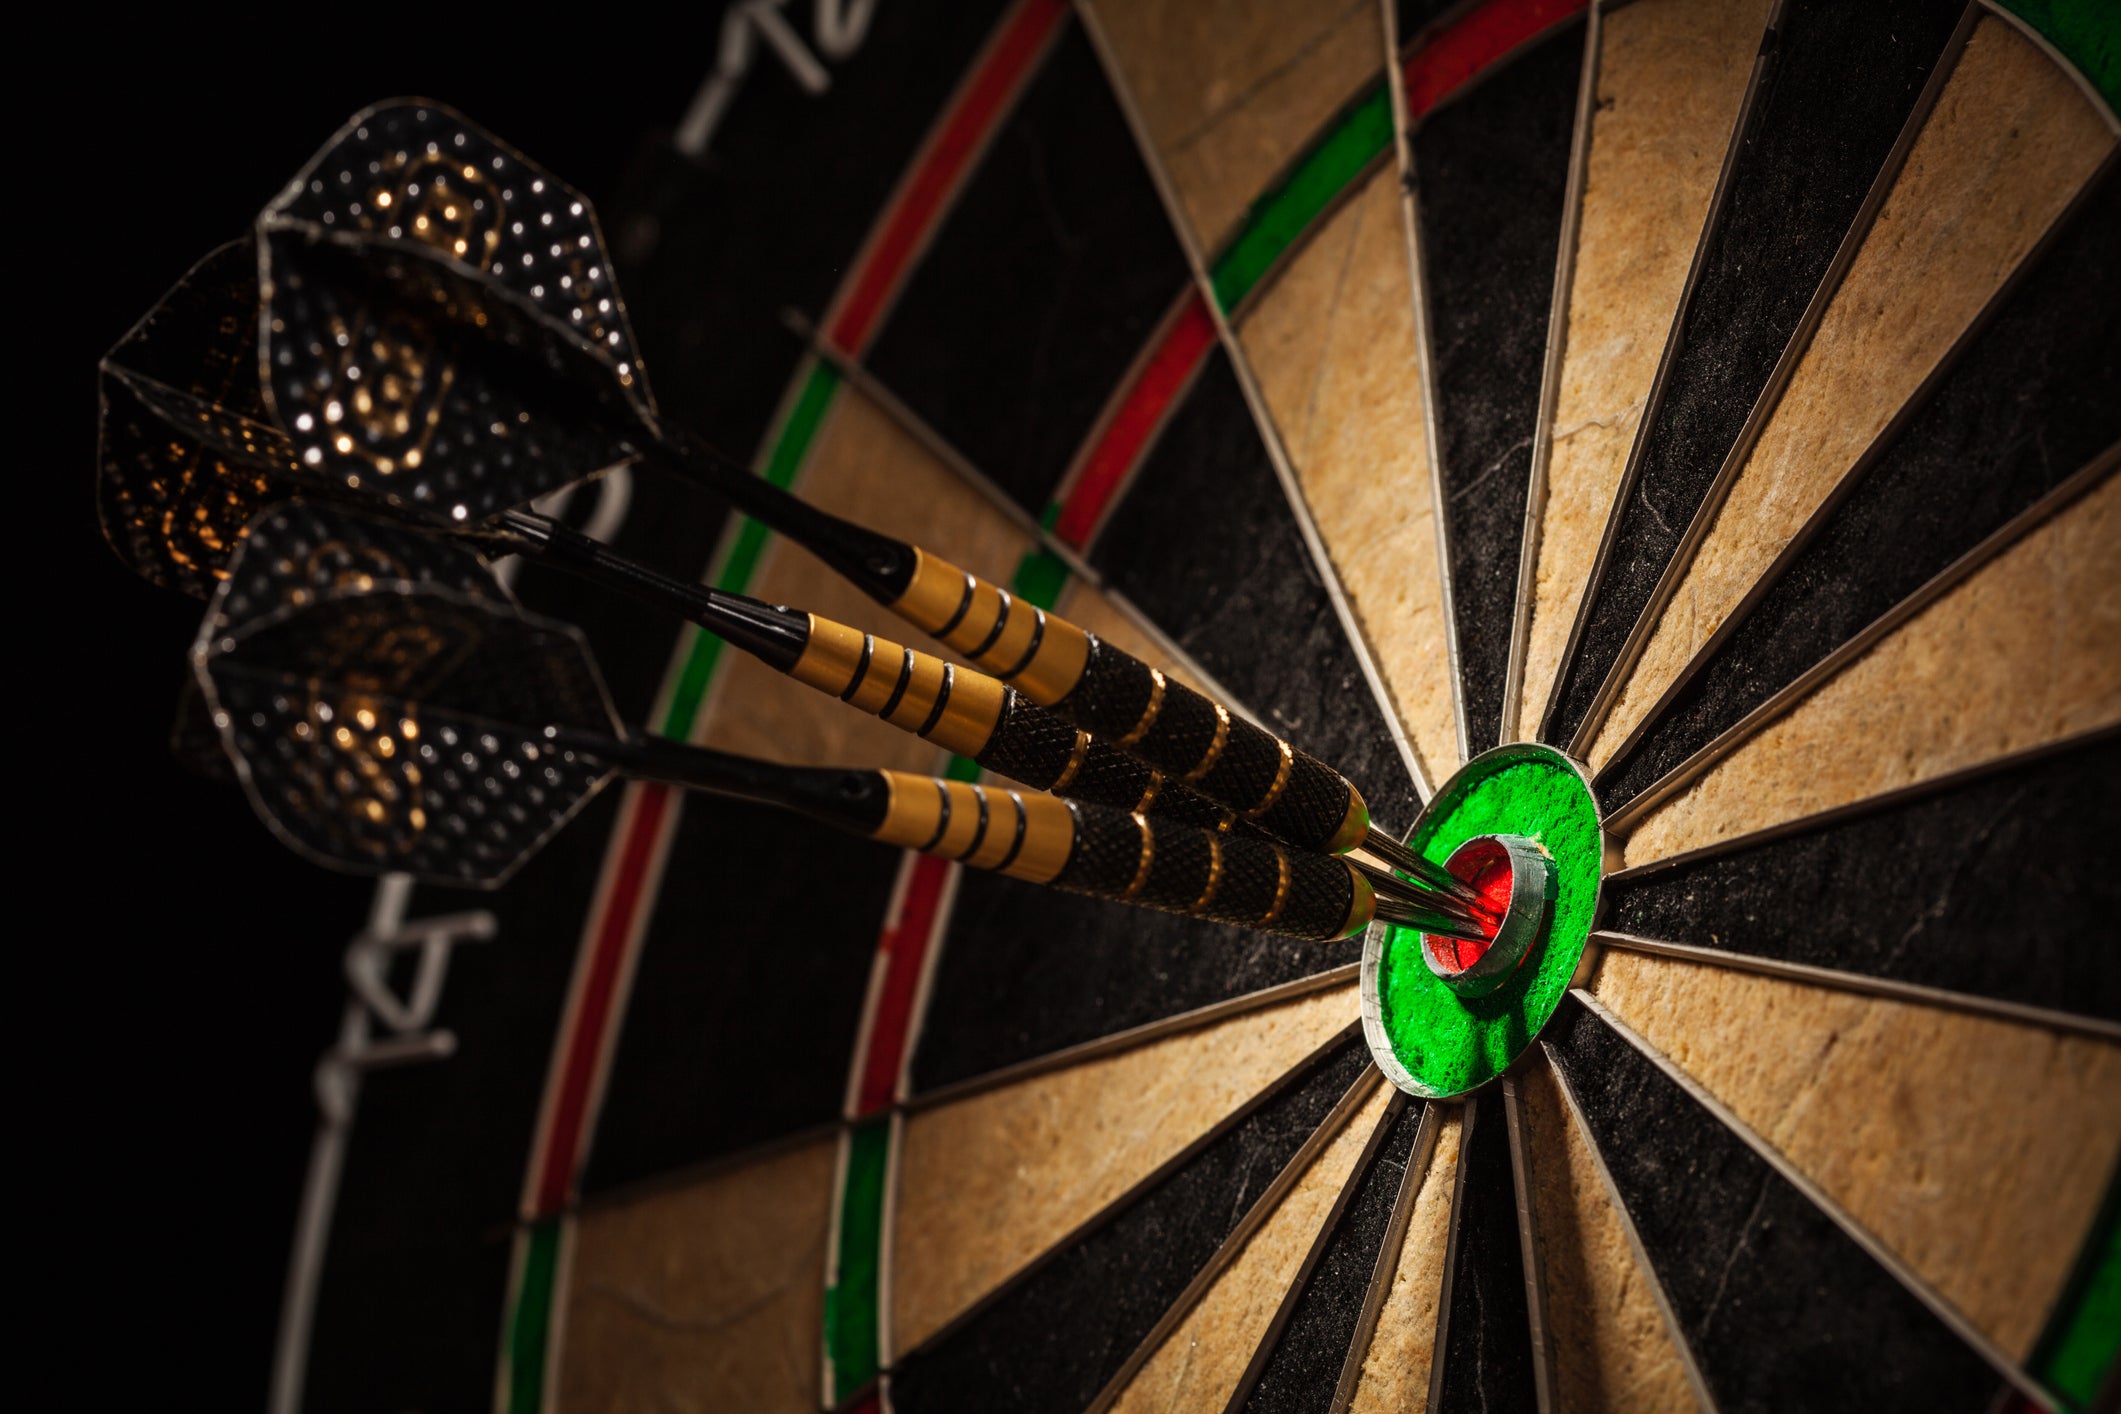 Top tips to take care of your dartboard